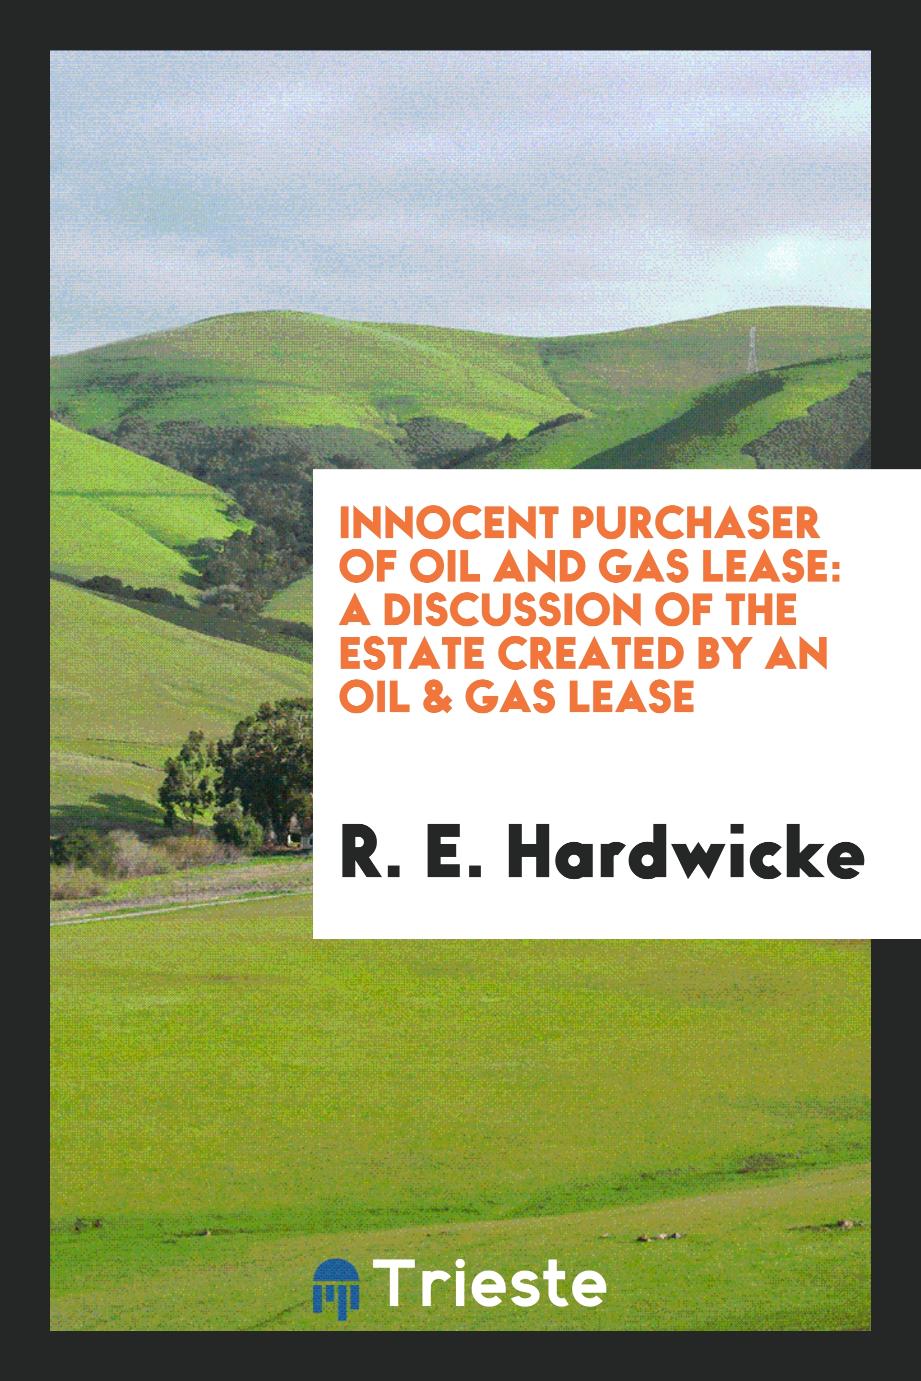 Innocent Purchaser of Oil and Gas Lease: A Discussion of the Estate Created by an Oil & Gas Lease